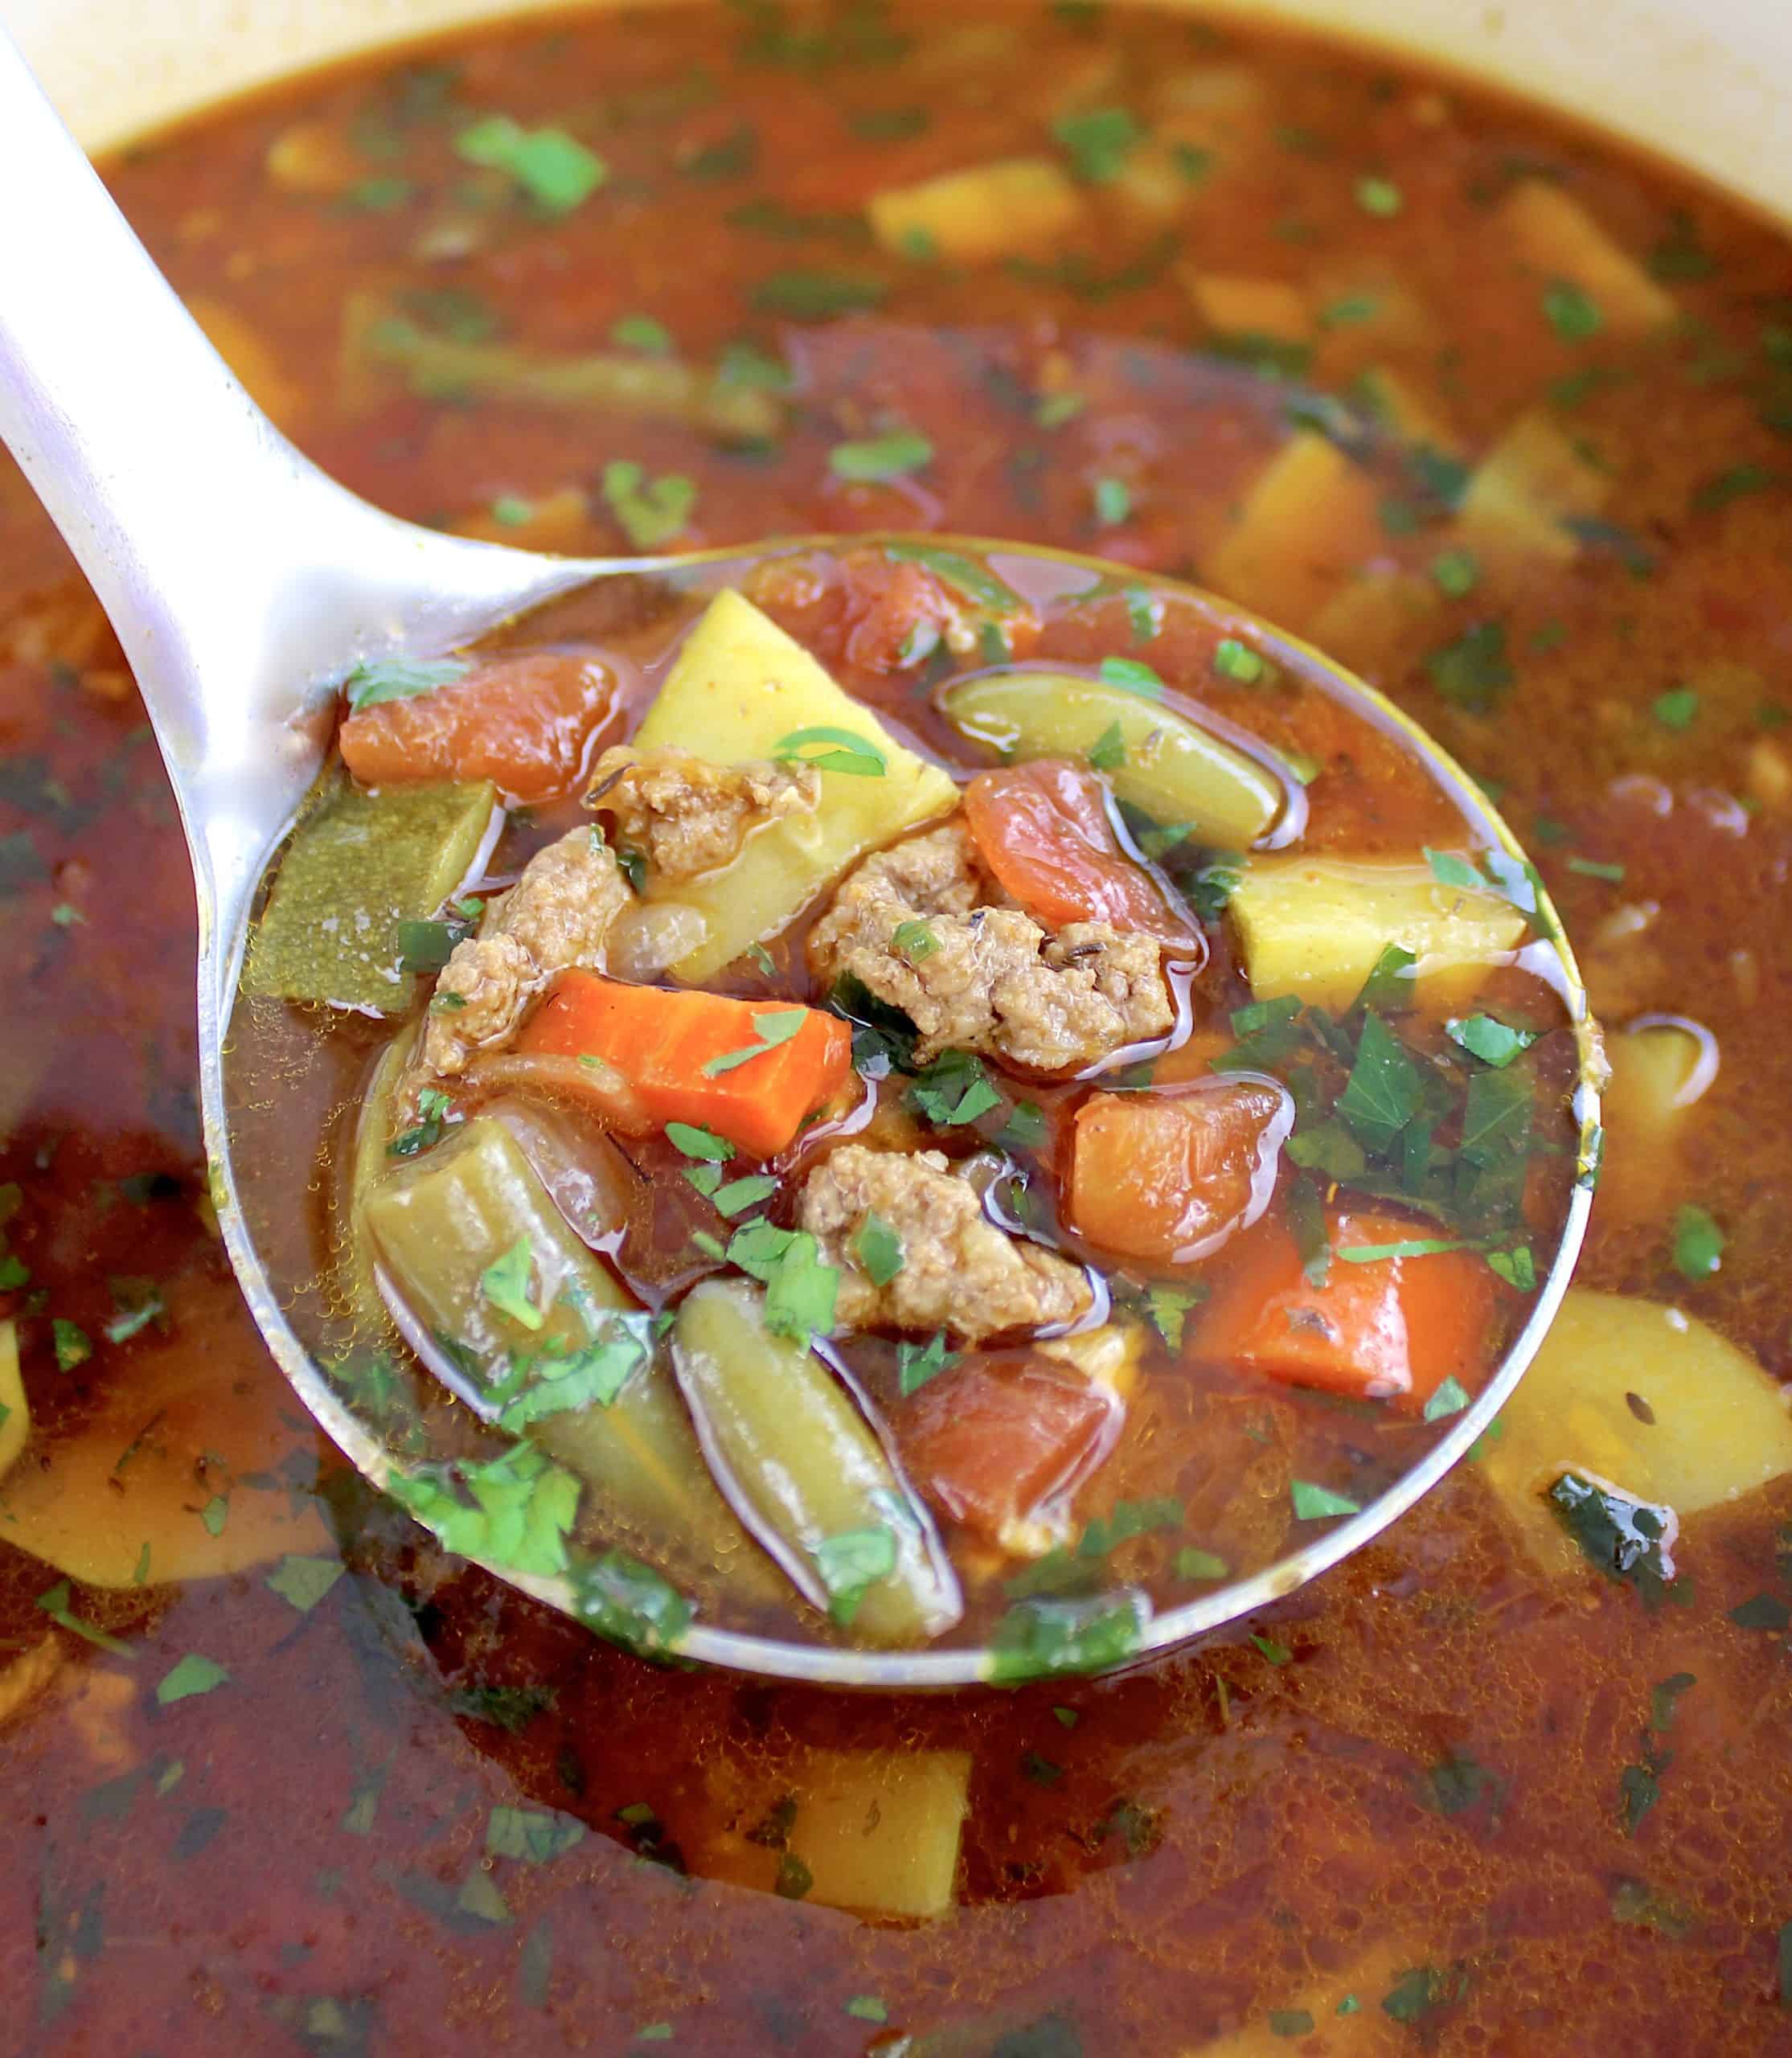 Vegetable Beef Soup being held up with ladle